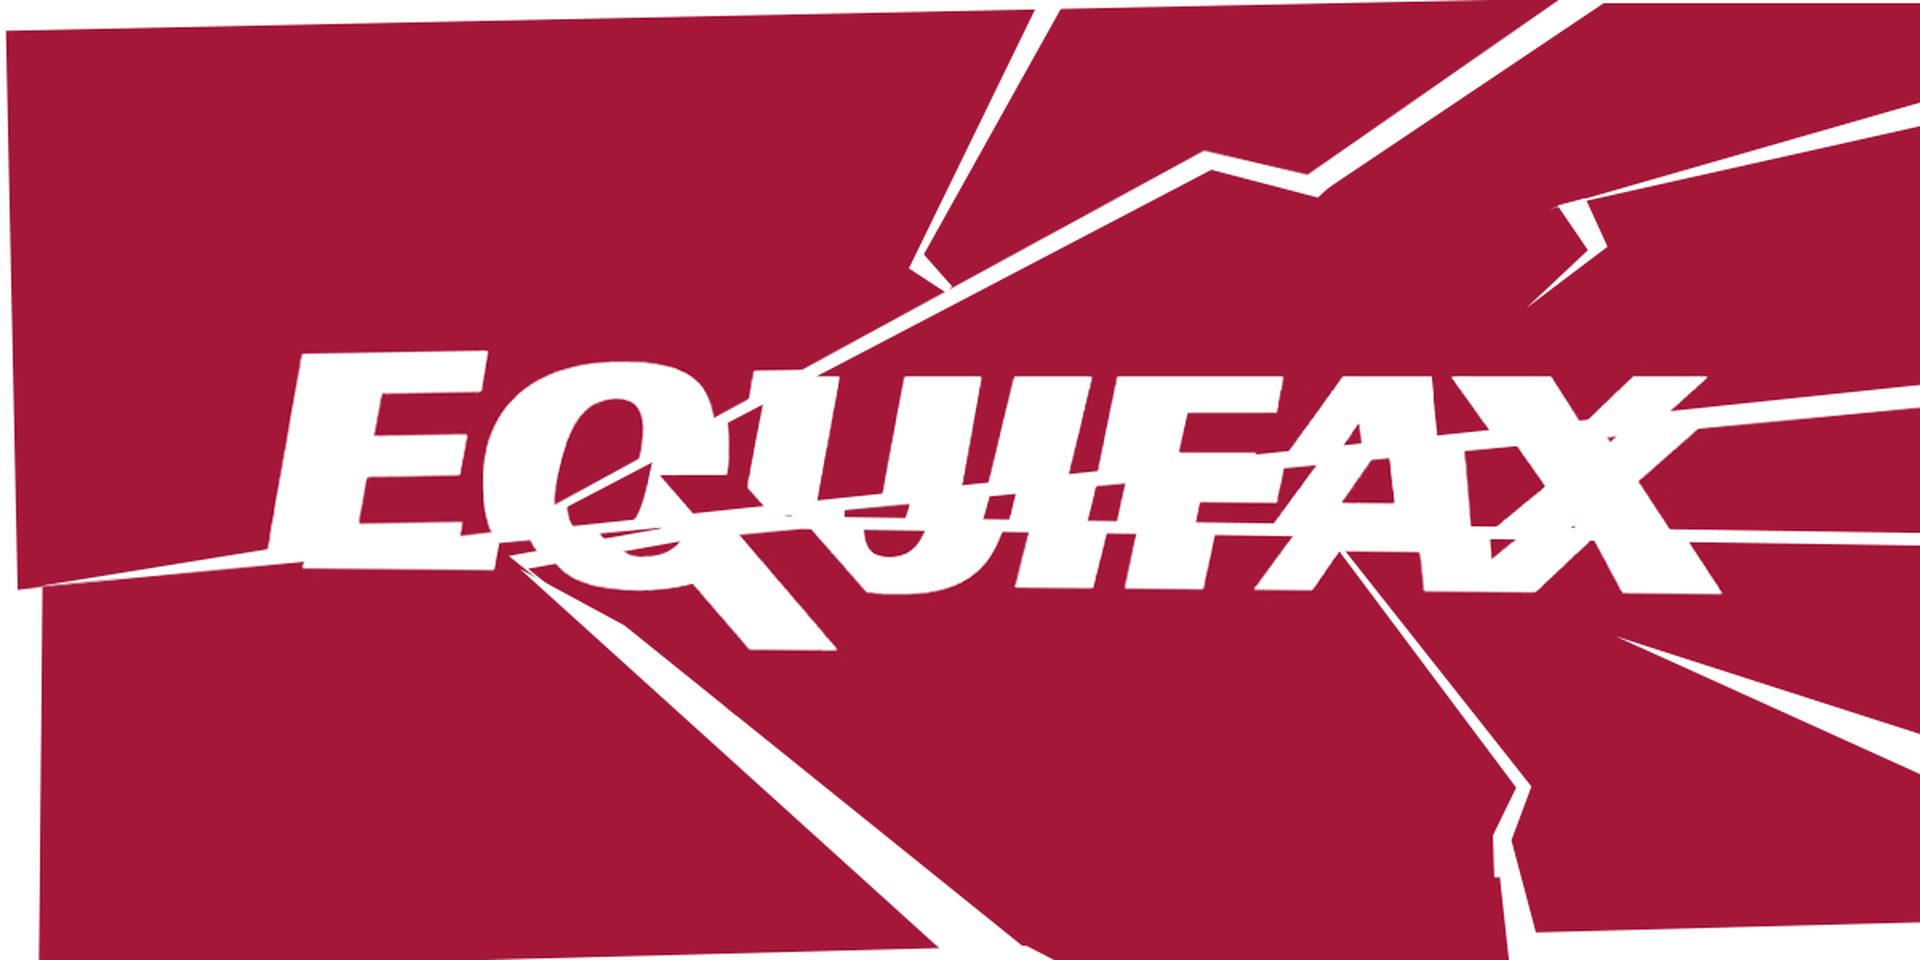 Has anyone received money from Equifax Settlement?